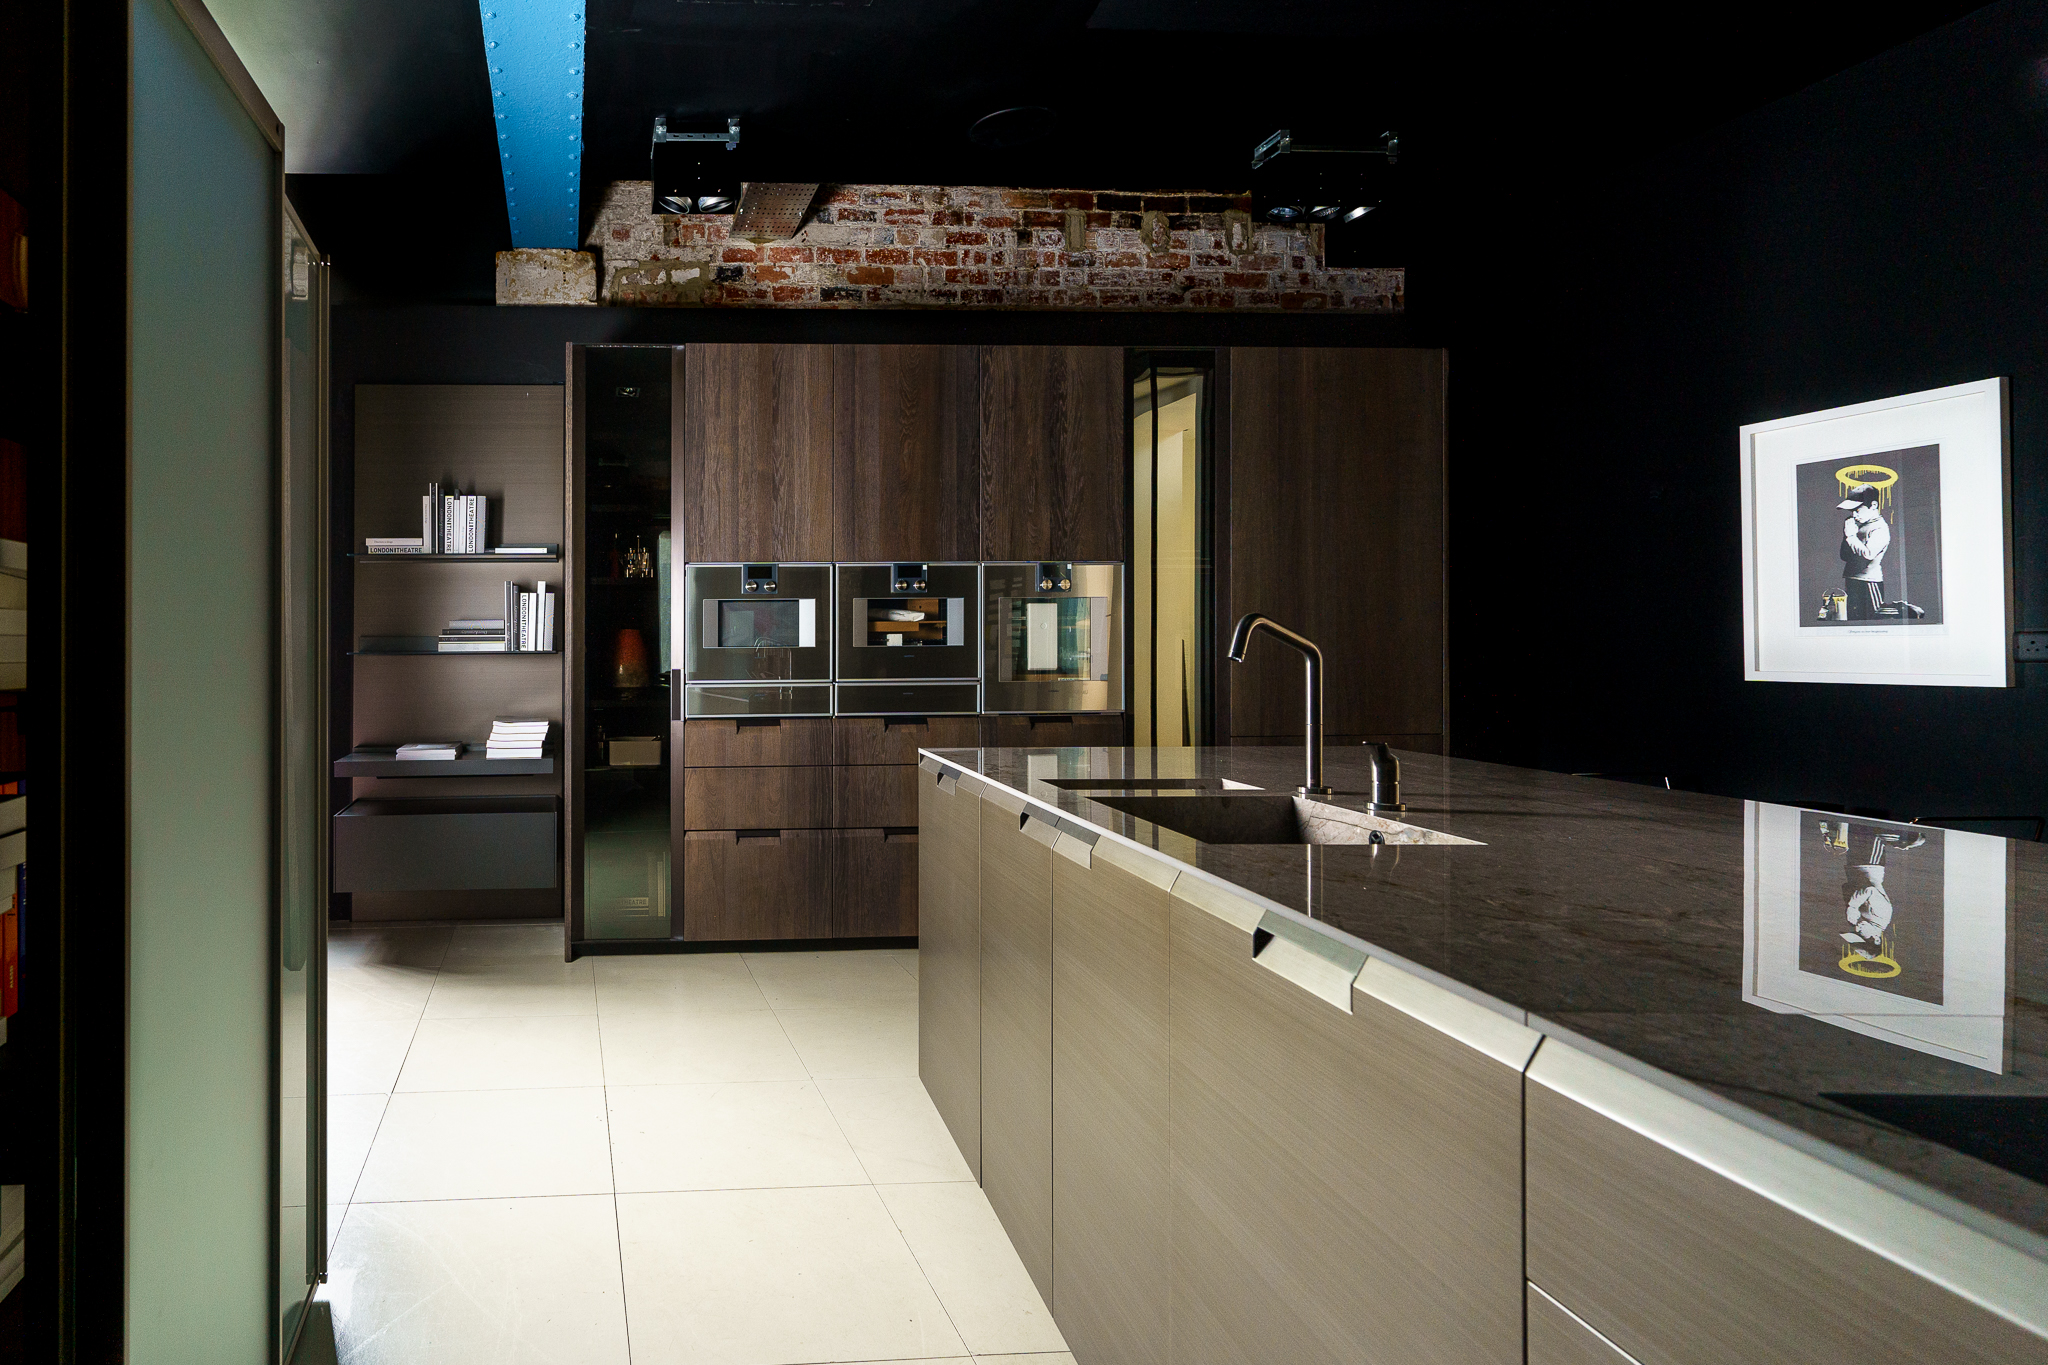 Poliform North Harrogate Showroom - Contemporary Kitchens and Furniture in the UK